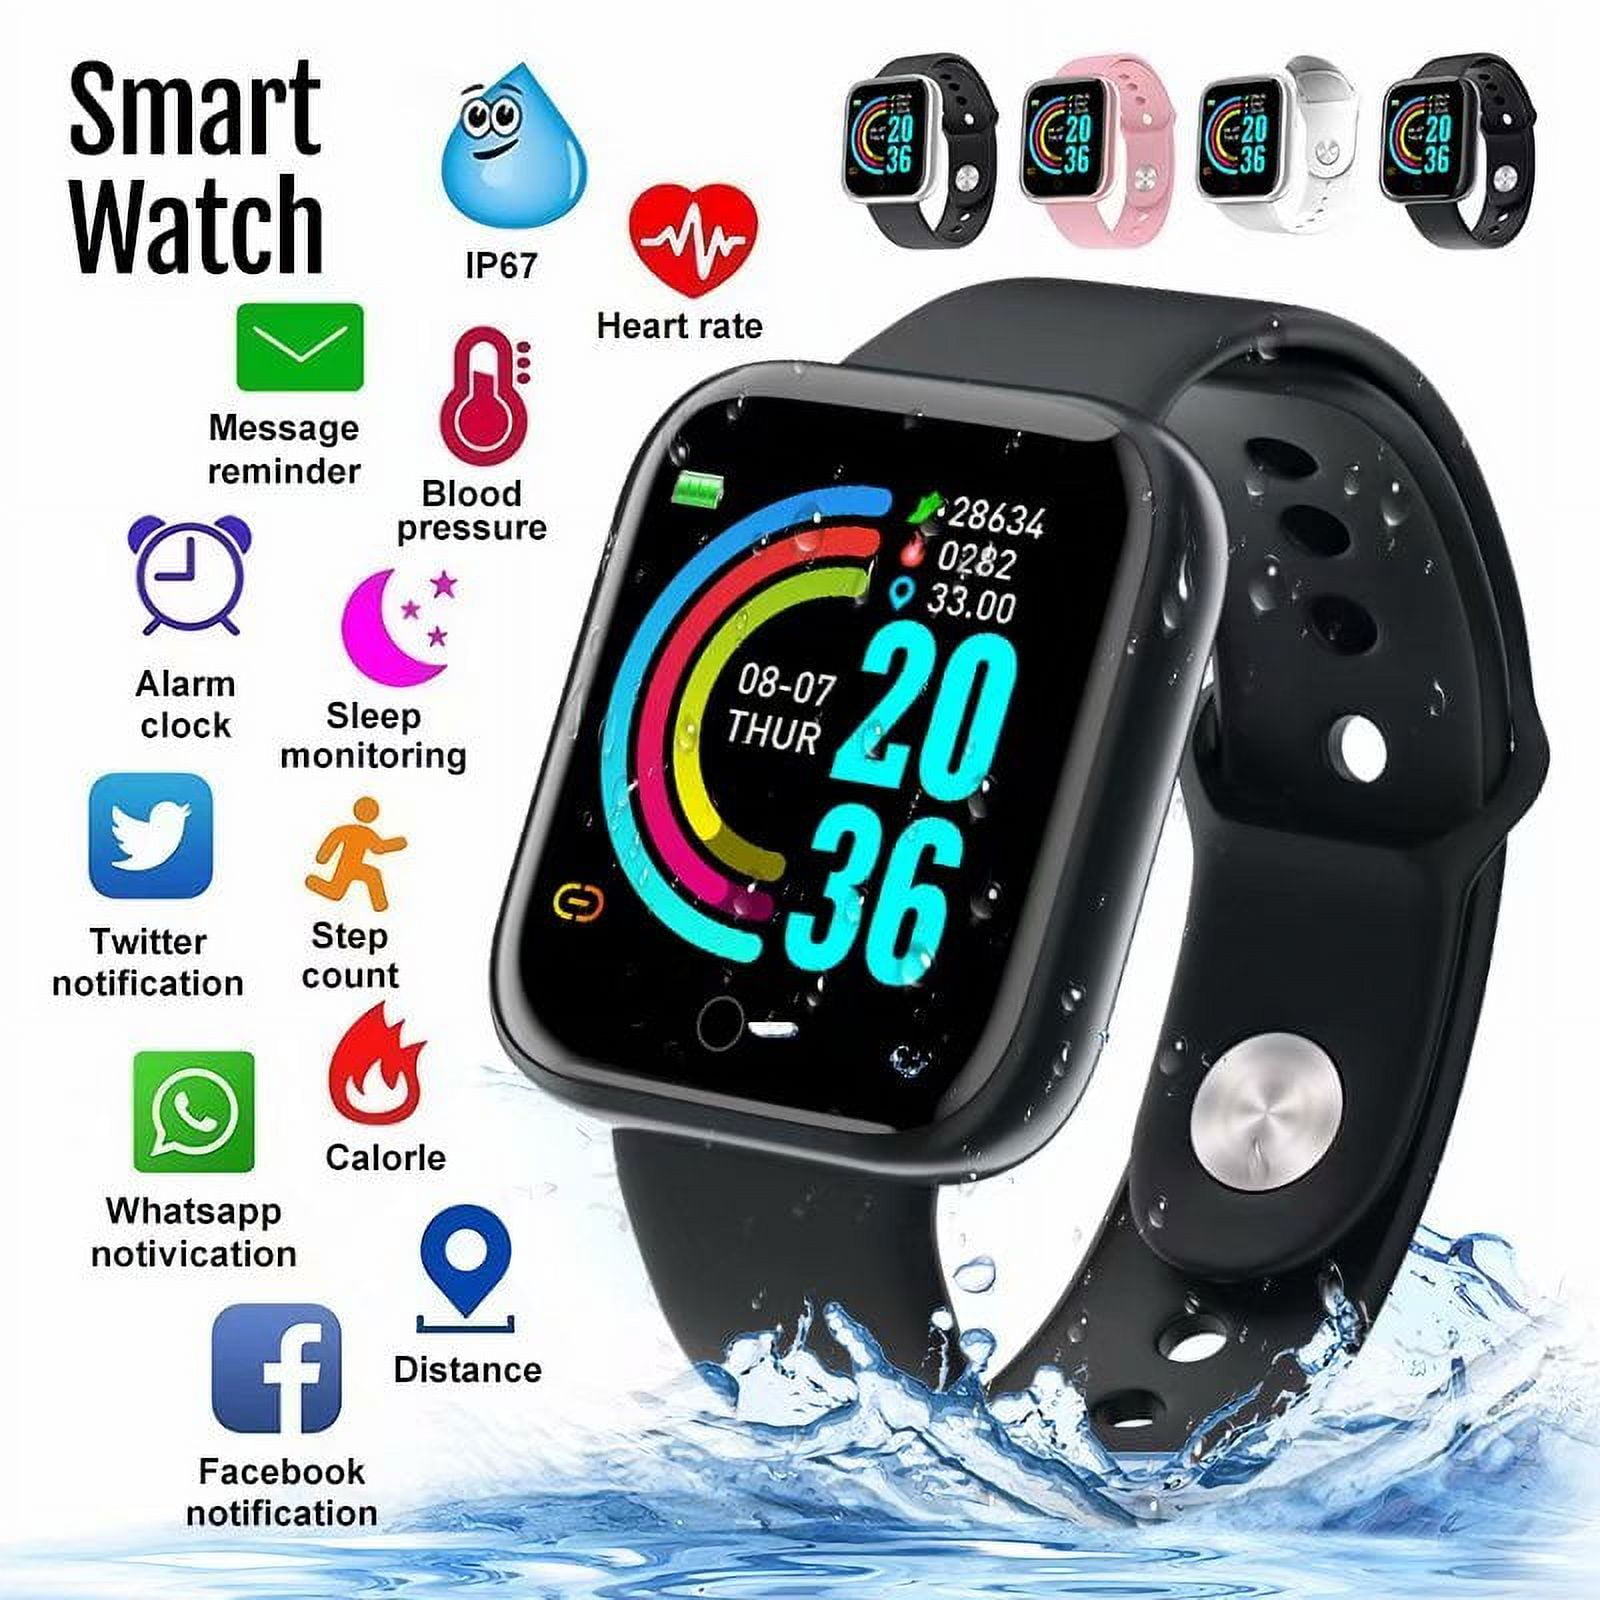 LG Watch in Black W100: Android Wear Smart Watch | LG USA